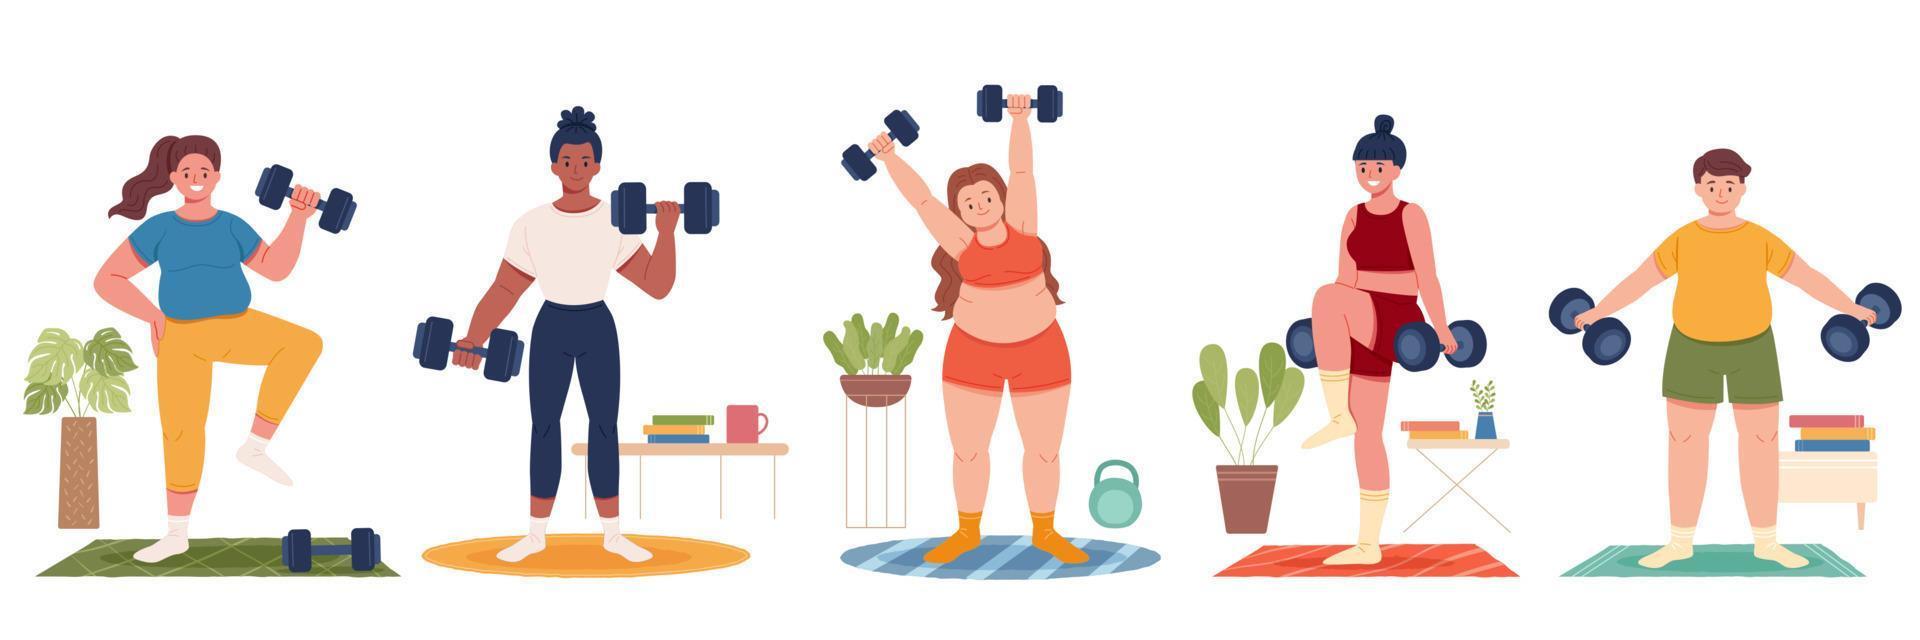 Collection of multi racial people exercising at home, home gym training concept. Flat design illustration of men and women lifting dumbbell weights indoors. vector